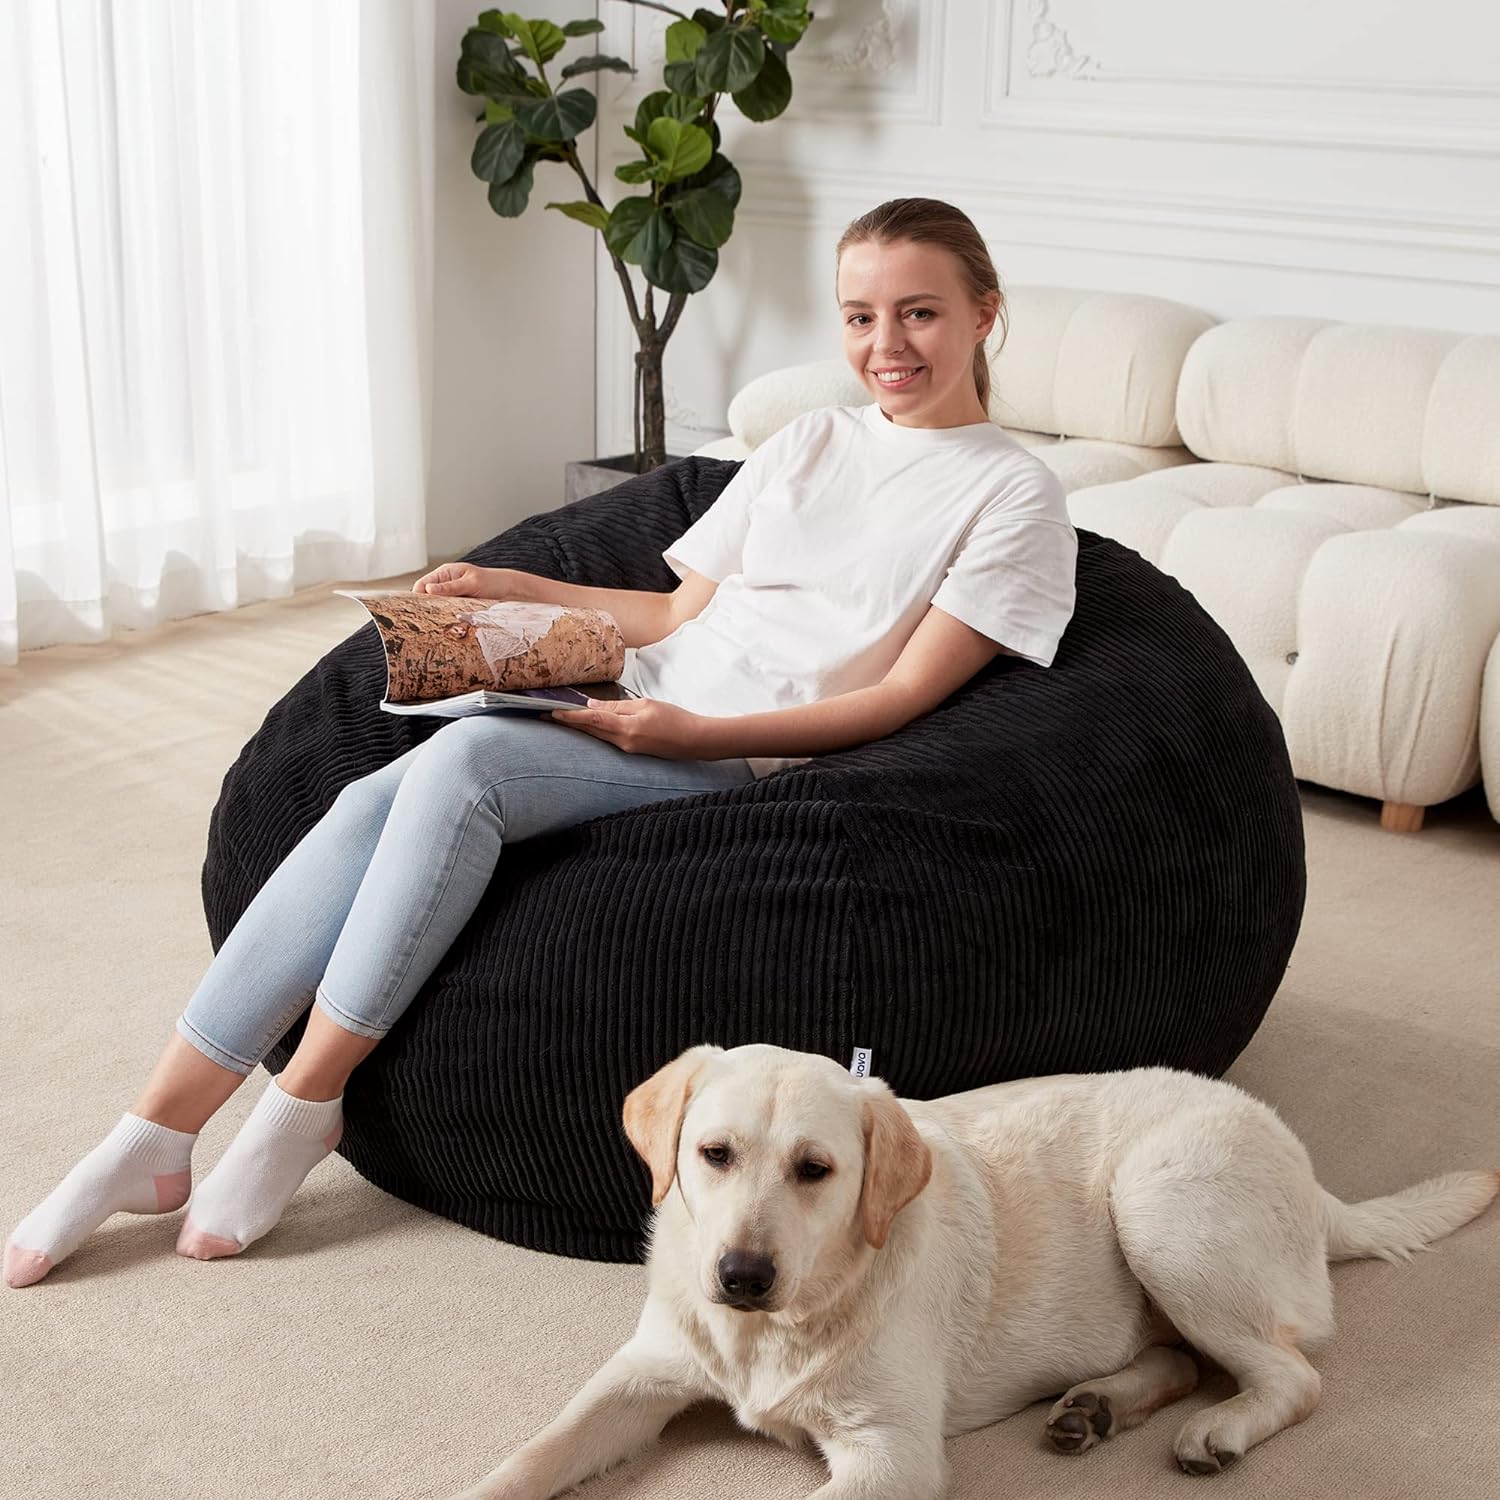 Homguava Bean Bag Chair: Teardrop Bean Bags with Memory Foam Filled, Compact Beanbag Chairs Soft Sofa with Corduroy Cover (Black)